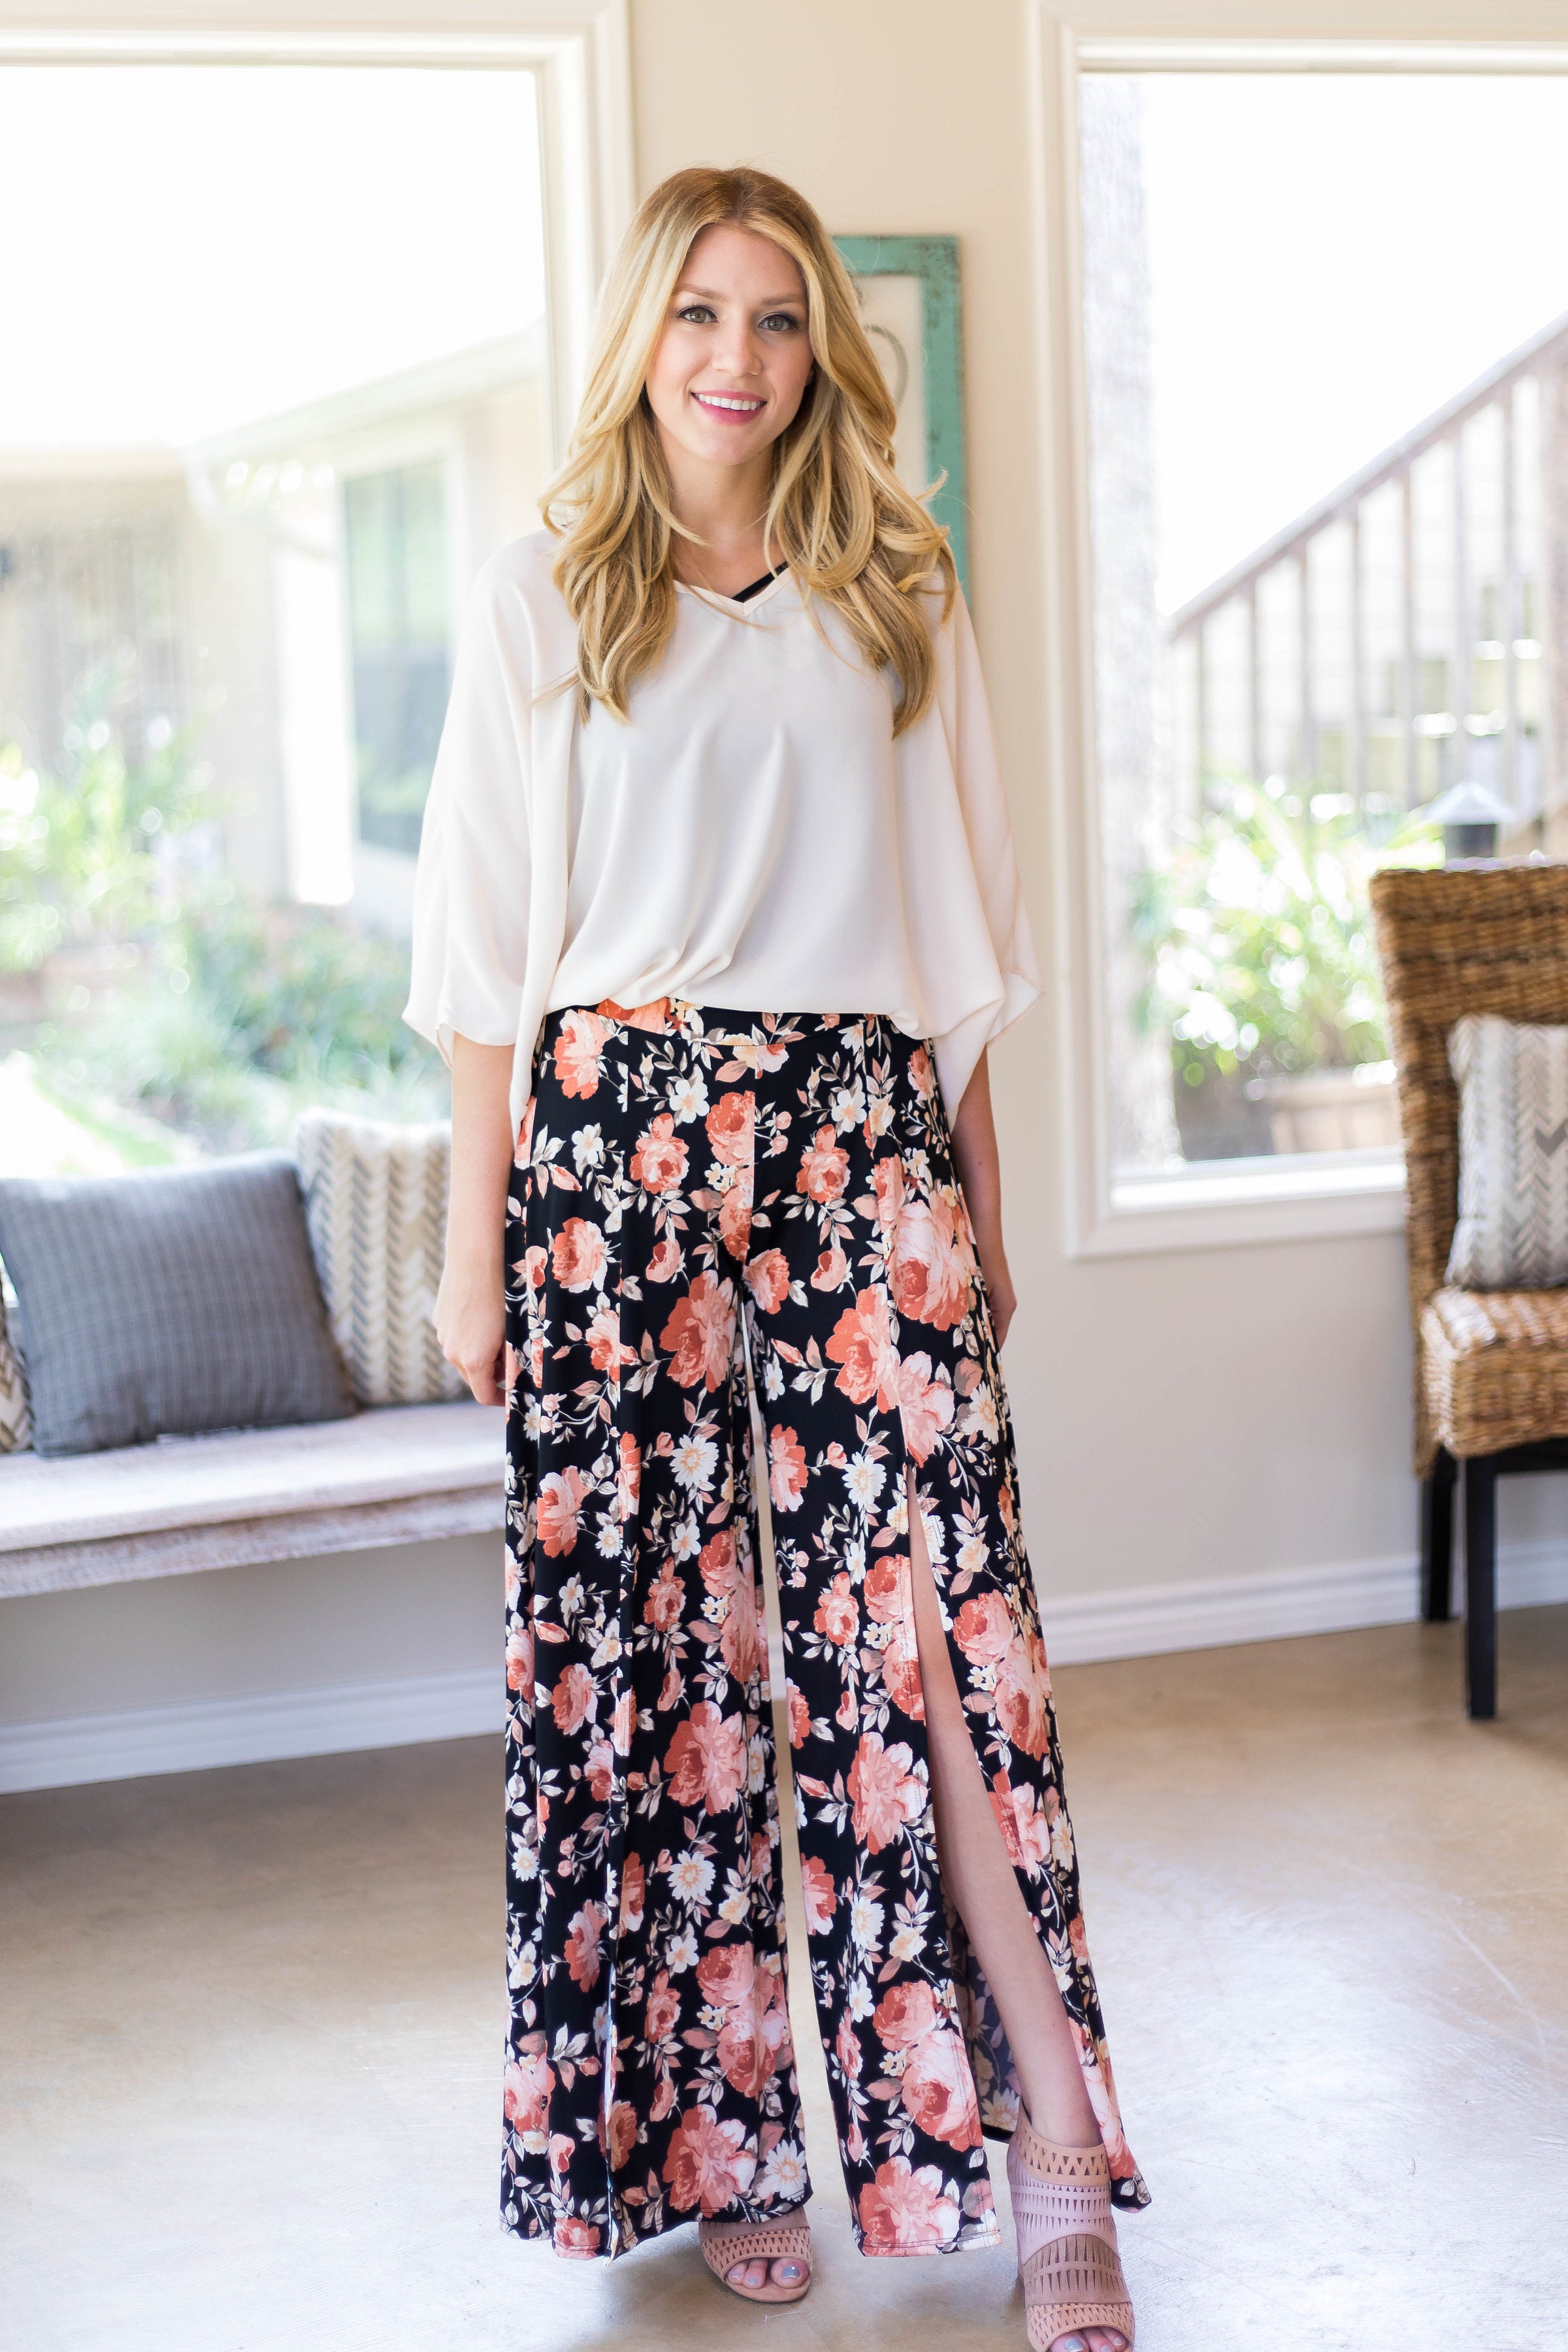 Trips With You Floral Split Pants in Black - Giddy Up Glamour Boutique